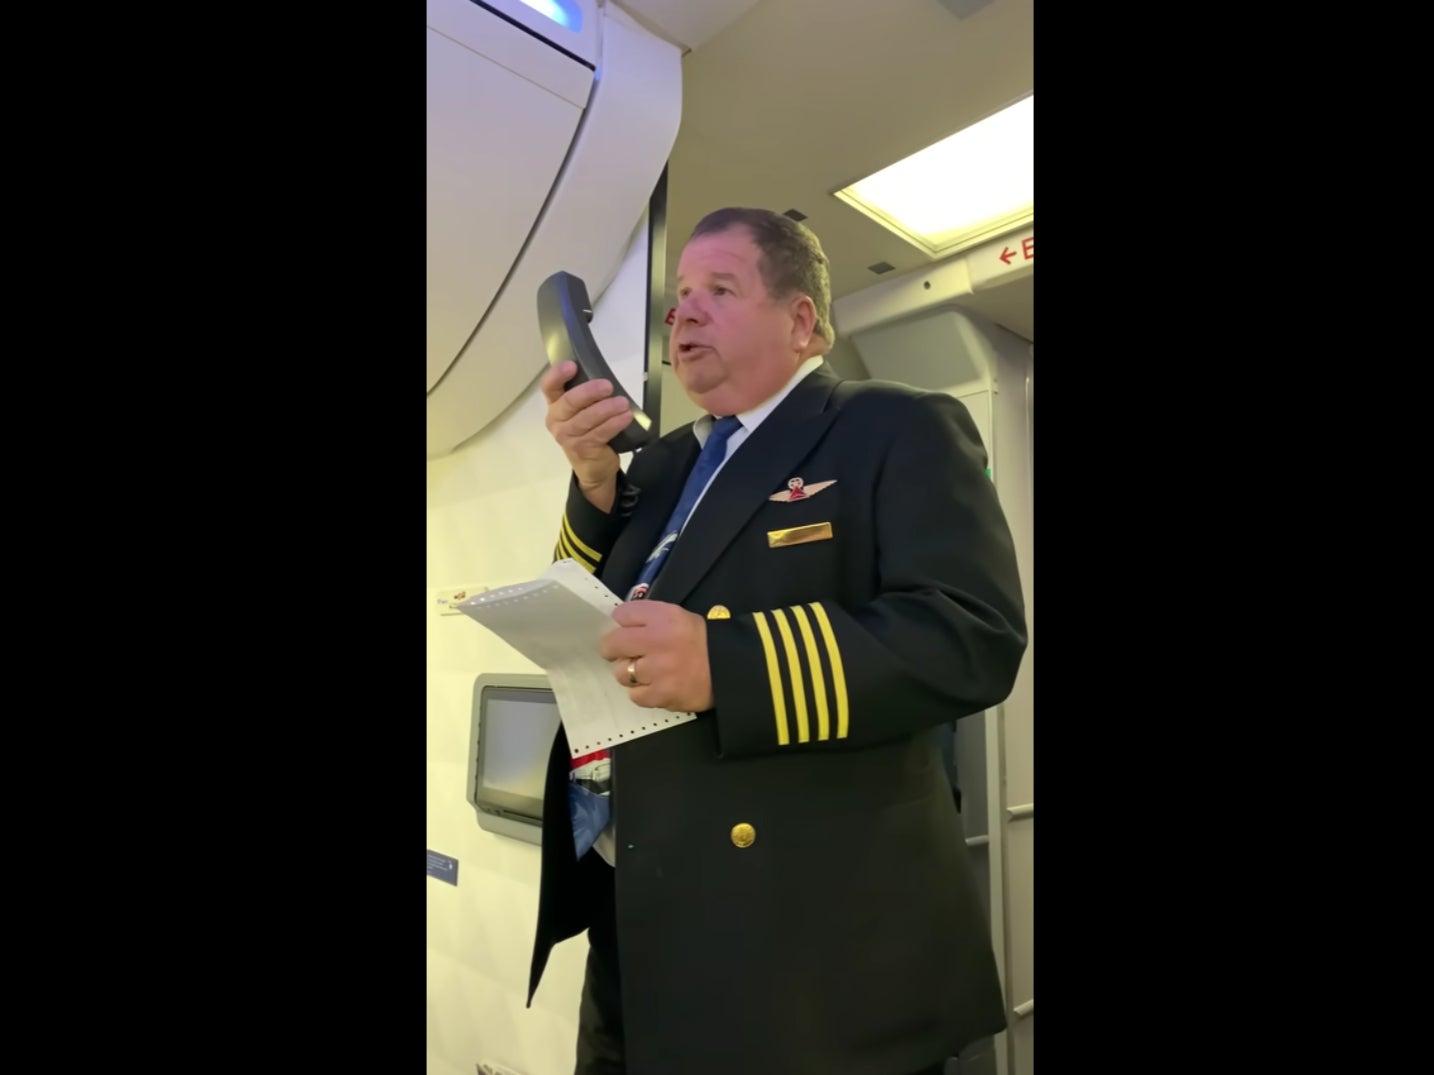 ‘Captain Conrad’ gives tear jerking farewell speech to Delta passengers and cabin crew